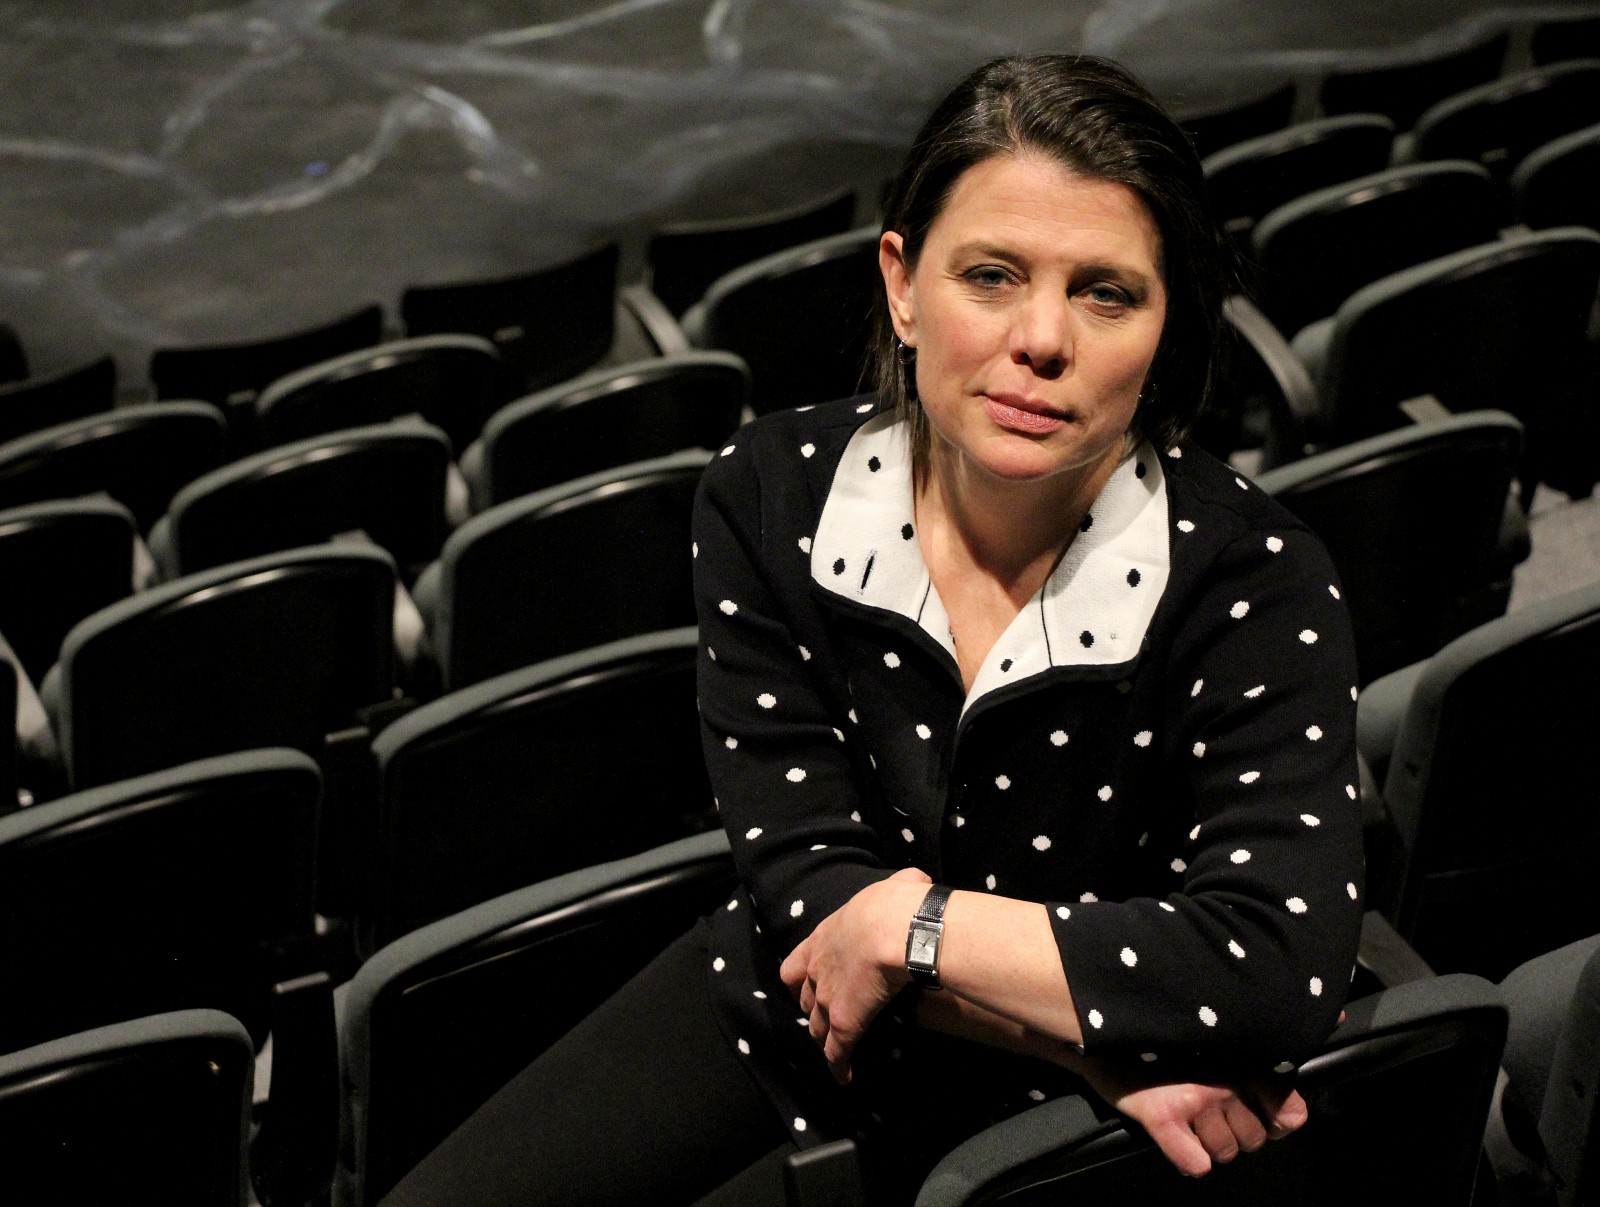 Assistant Professor Karen Fricker, Department of Dramatic Arts, is the new theatre critic for the Toronto Star, the nation's biggest, most-read daily newspaper.